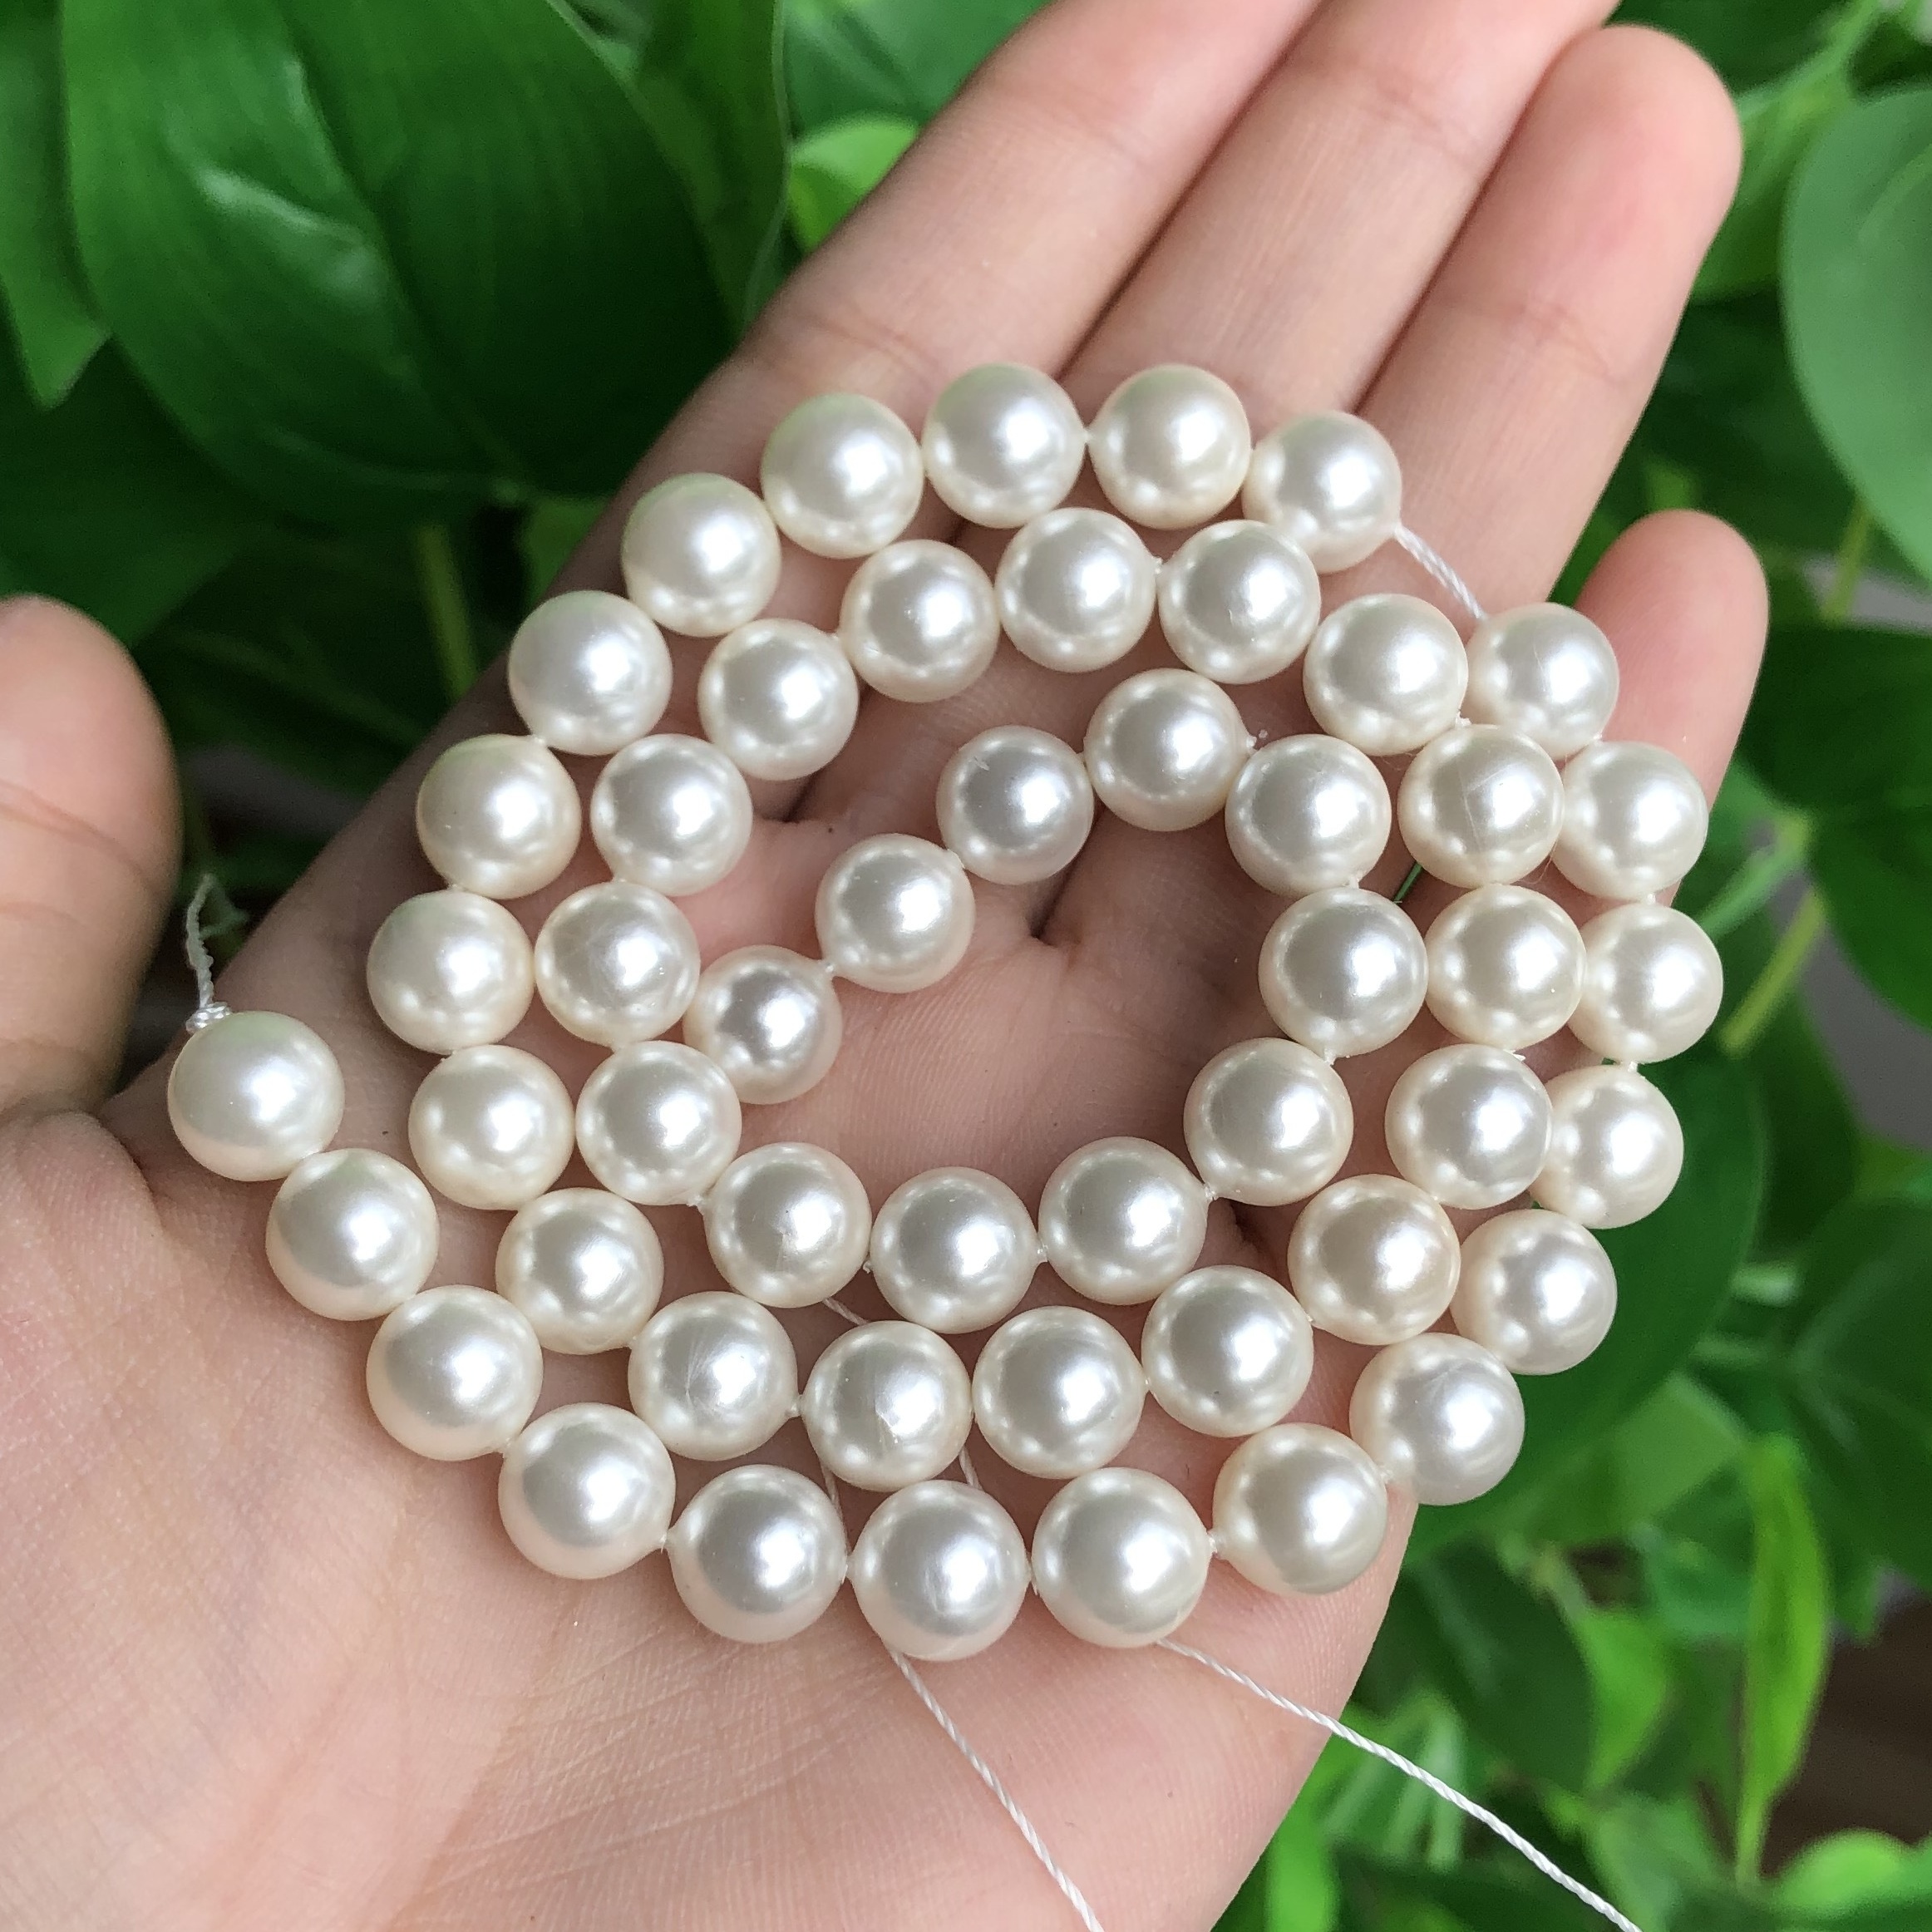 Natural Freshwater Real Pearl Beads White Round Loose Spacer